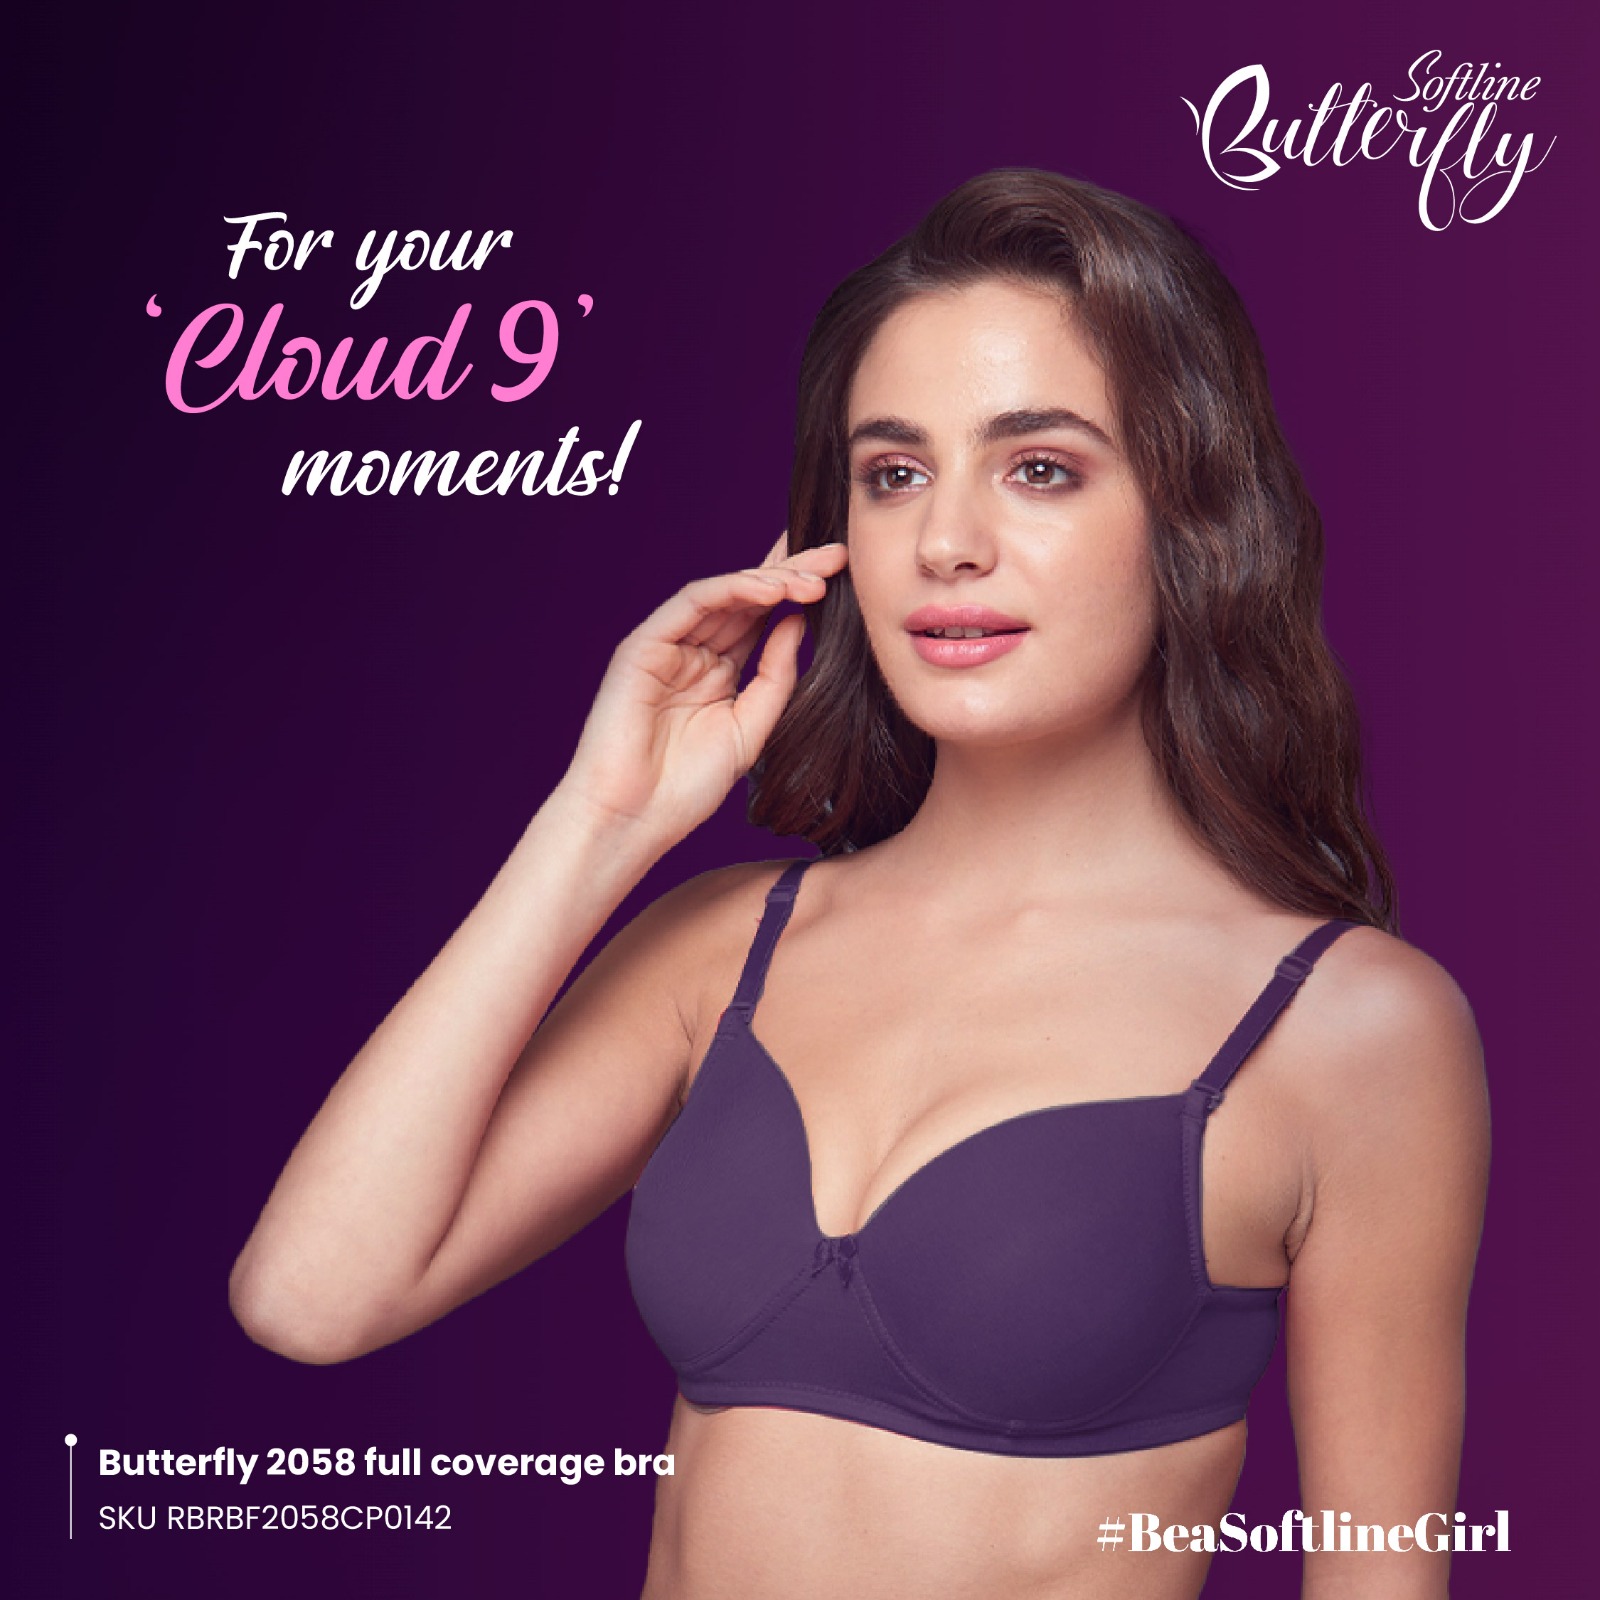 Softline Girl on X: Meet your new lingerie obsession! #Softline's Full  Coverage Padded bras redefine what it means to feel fabulous every day.   #BeASoftlineGirl #FullCoveragePaddedBra #Padded  #FullCoverage #Comfort #Confidence